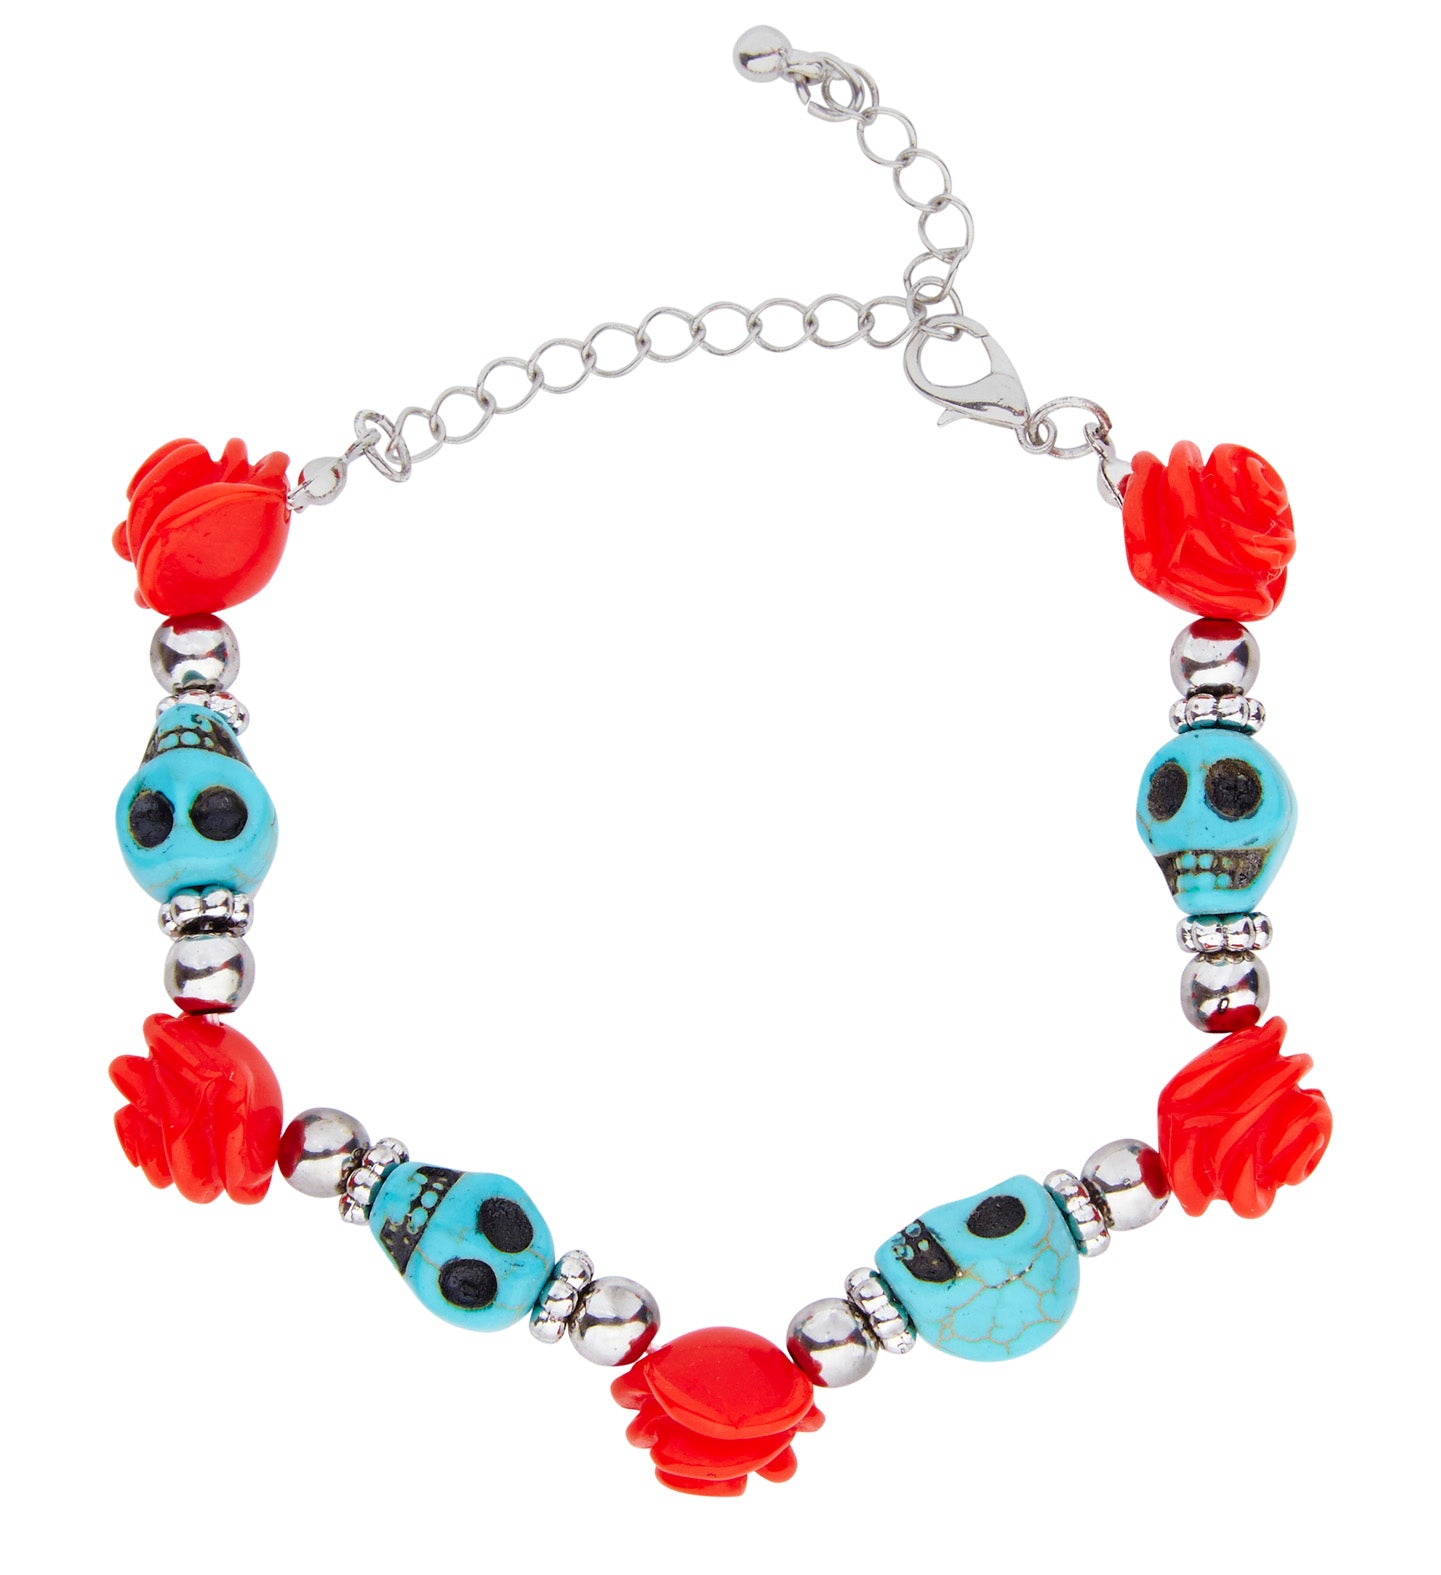 Blue Skulls and Red Roses Bracelet costume accessory 